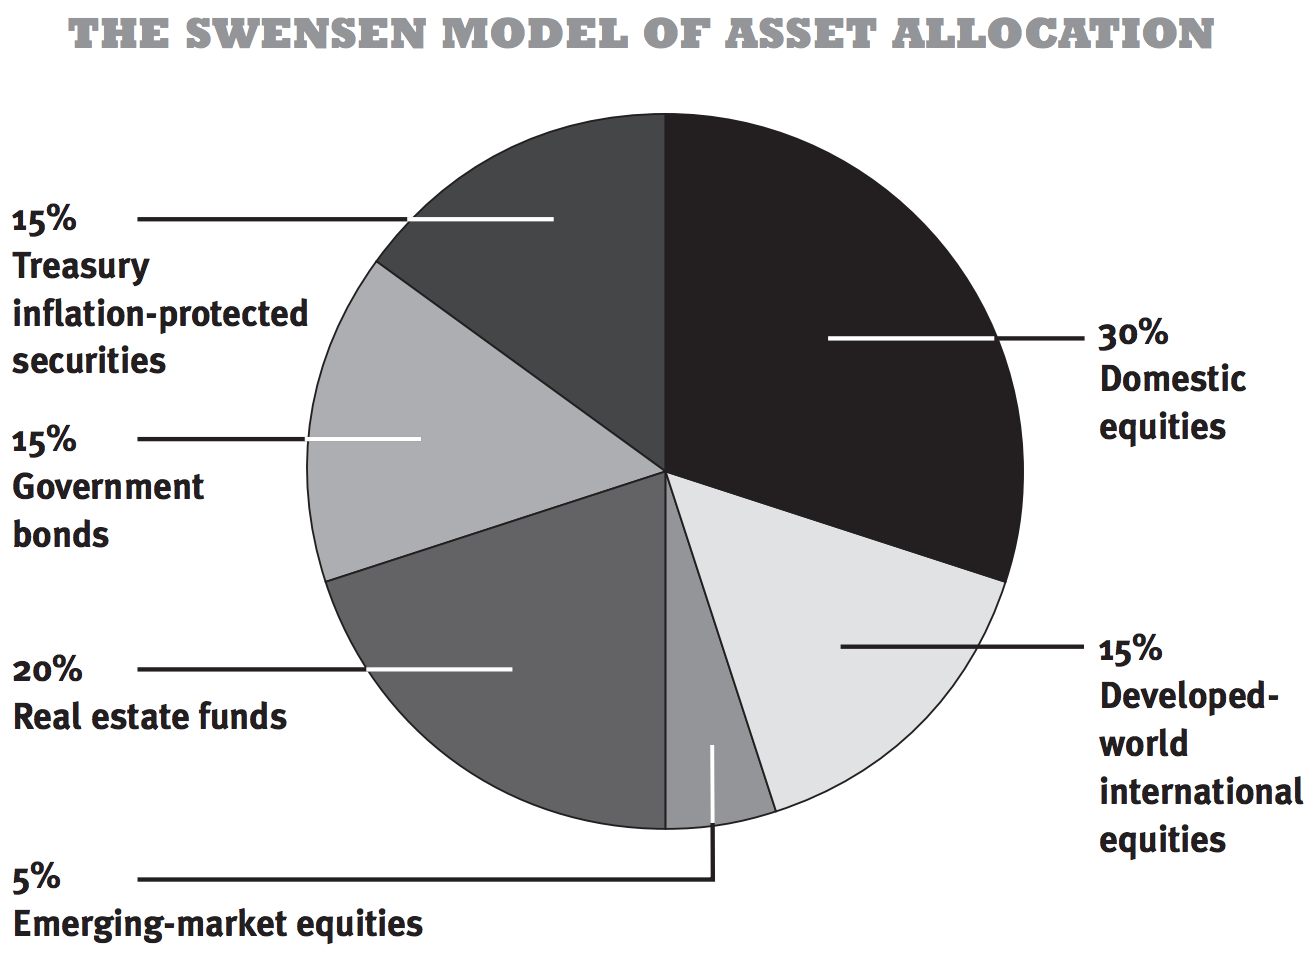  A pie chart shows a diversified investment portfolio with 15% in Treasury inflation-protected securities, 15% in government bonds, 20% in real estate funds, 5% in emerging market equities, 15% in developed world international equities, and 30% in domestic equities.